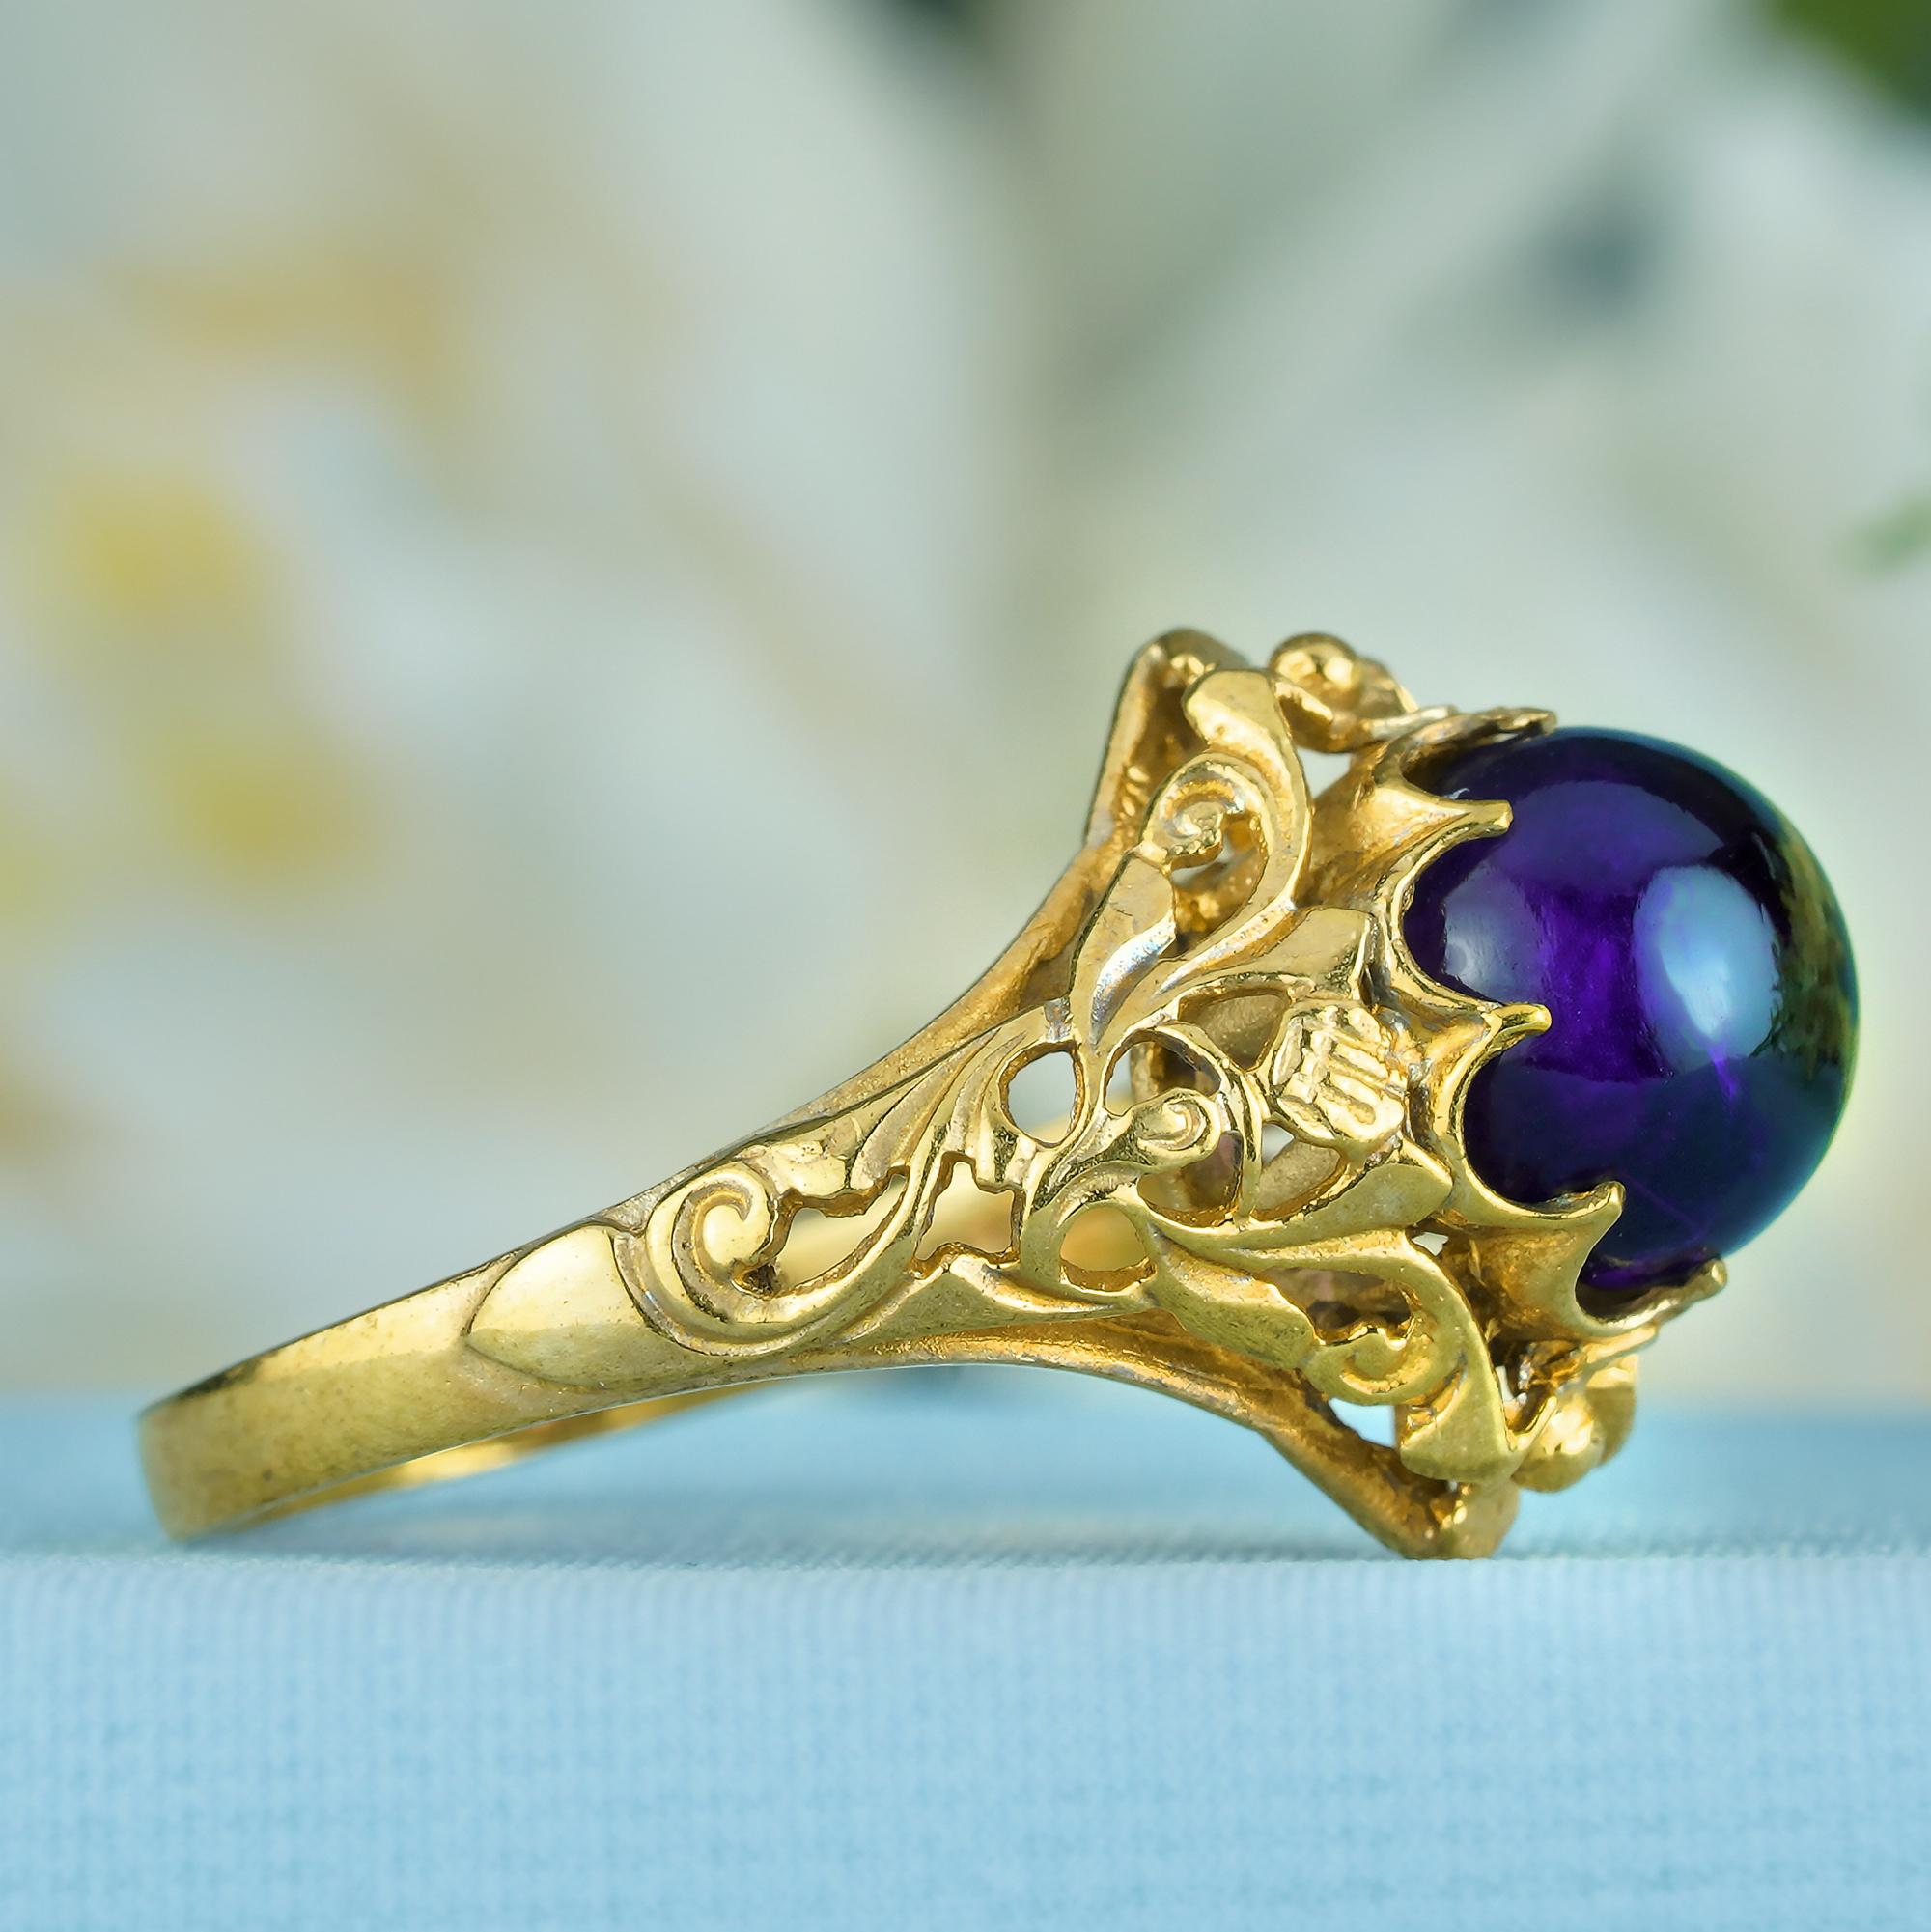 For Sale:  Natural Cabochon Amethyst Vintage Style Filigree Ring in Solid 9K Yellow Gold 4